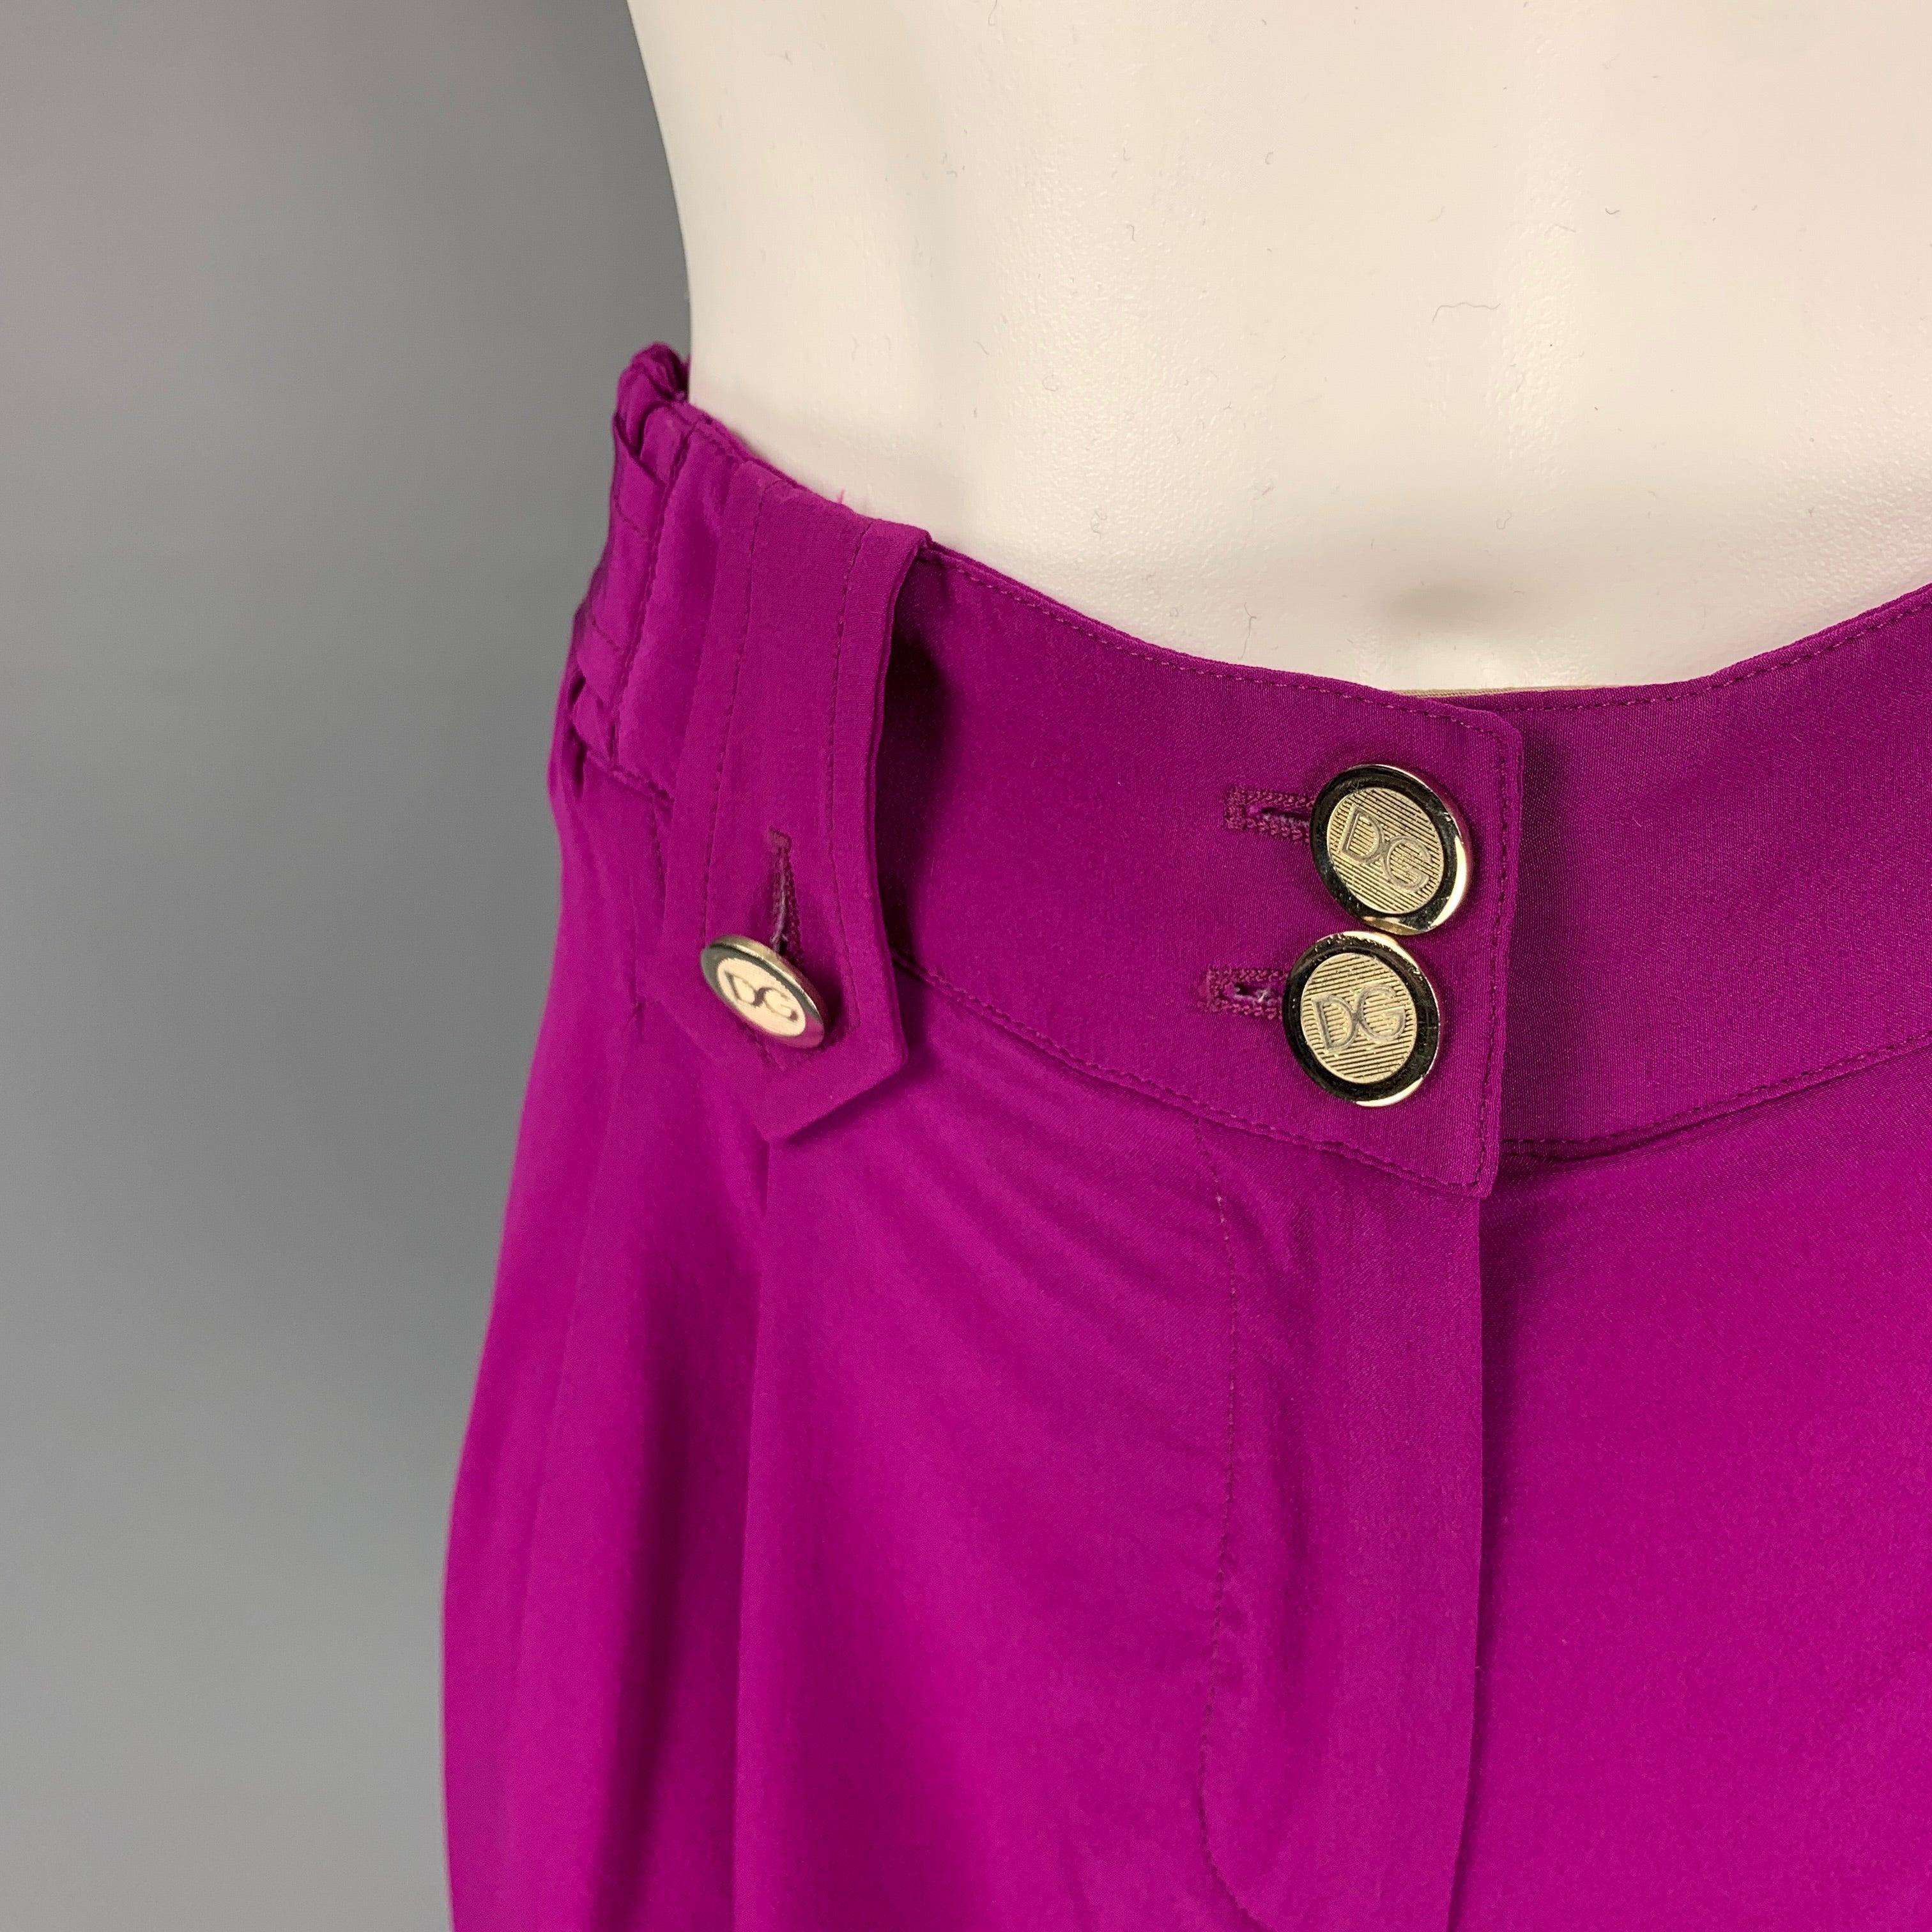 DOLCE & GABBANA shorts comes in a purple silk with a beige trim featuring a pleated style, gold tone logo buttons, and a zip fly closure. Made in Italy.
Very Good
Pre-Owned Condition. 

Marked:   40 

Measurements: 
  Waist: 30 inches  Rise: 9